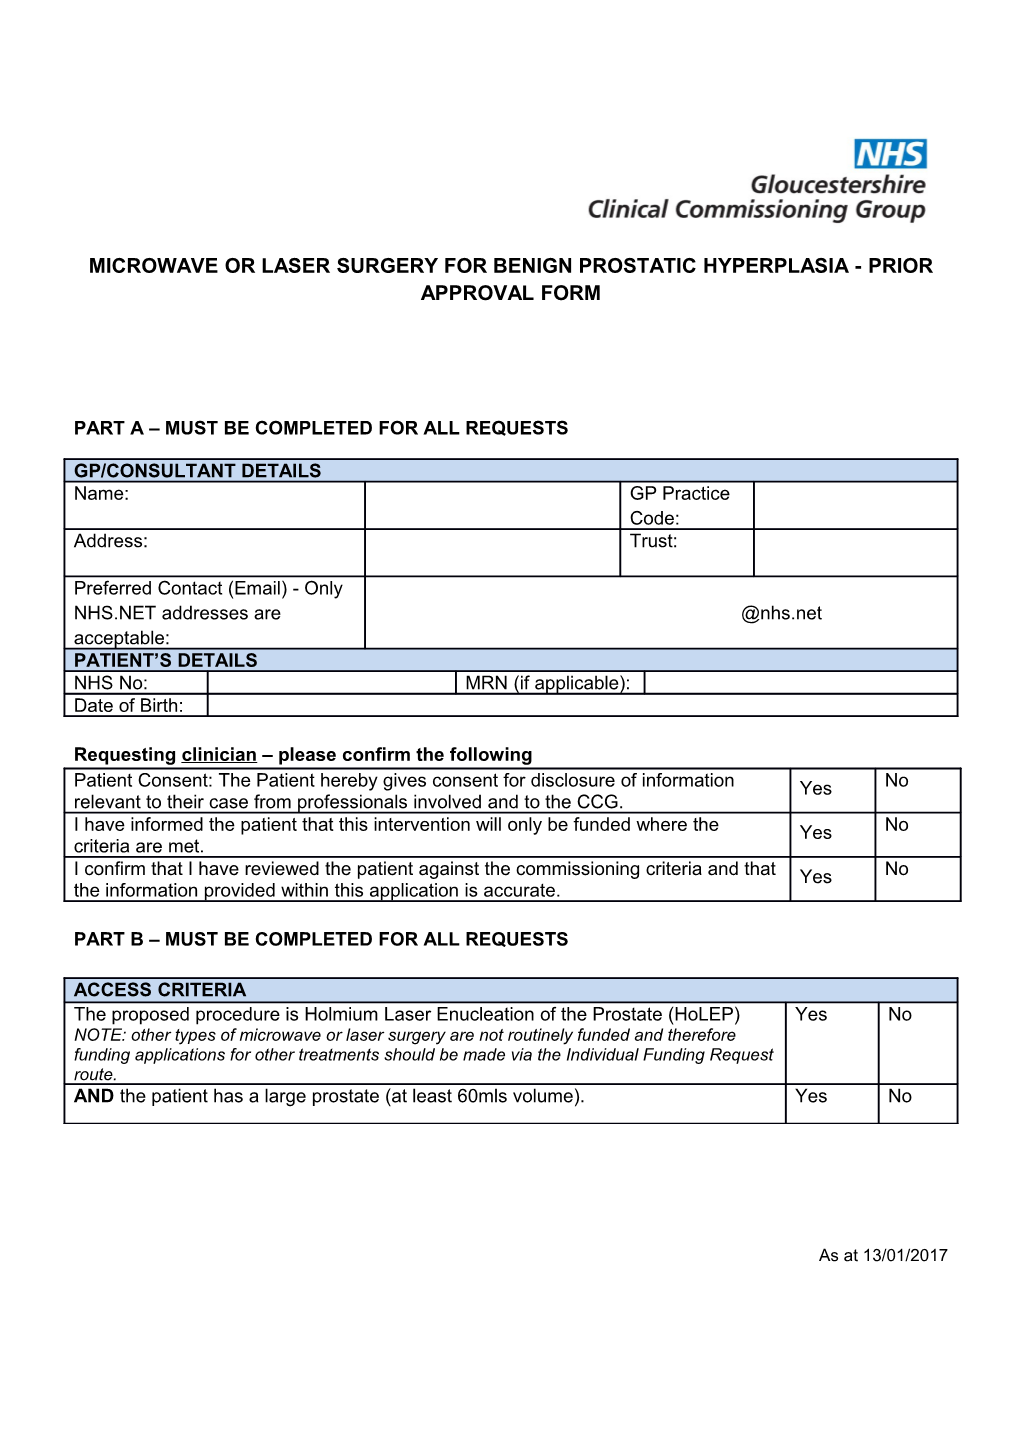 Microwave Or Laser Surgery for Benign Prostatic Hyperplasia -Prior Approval Form